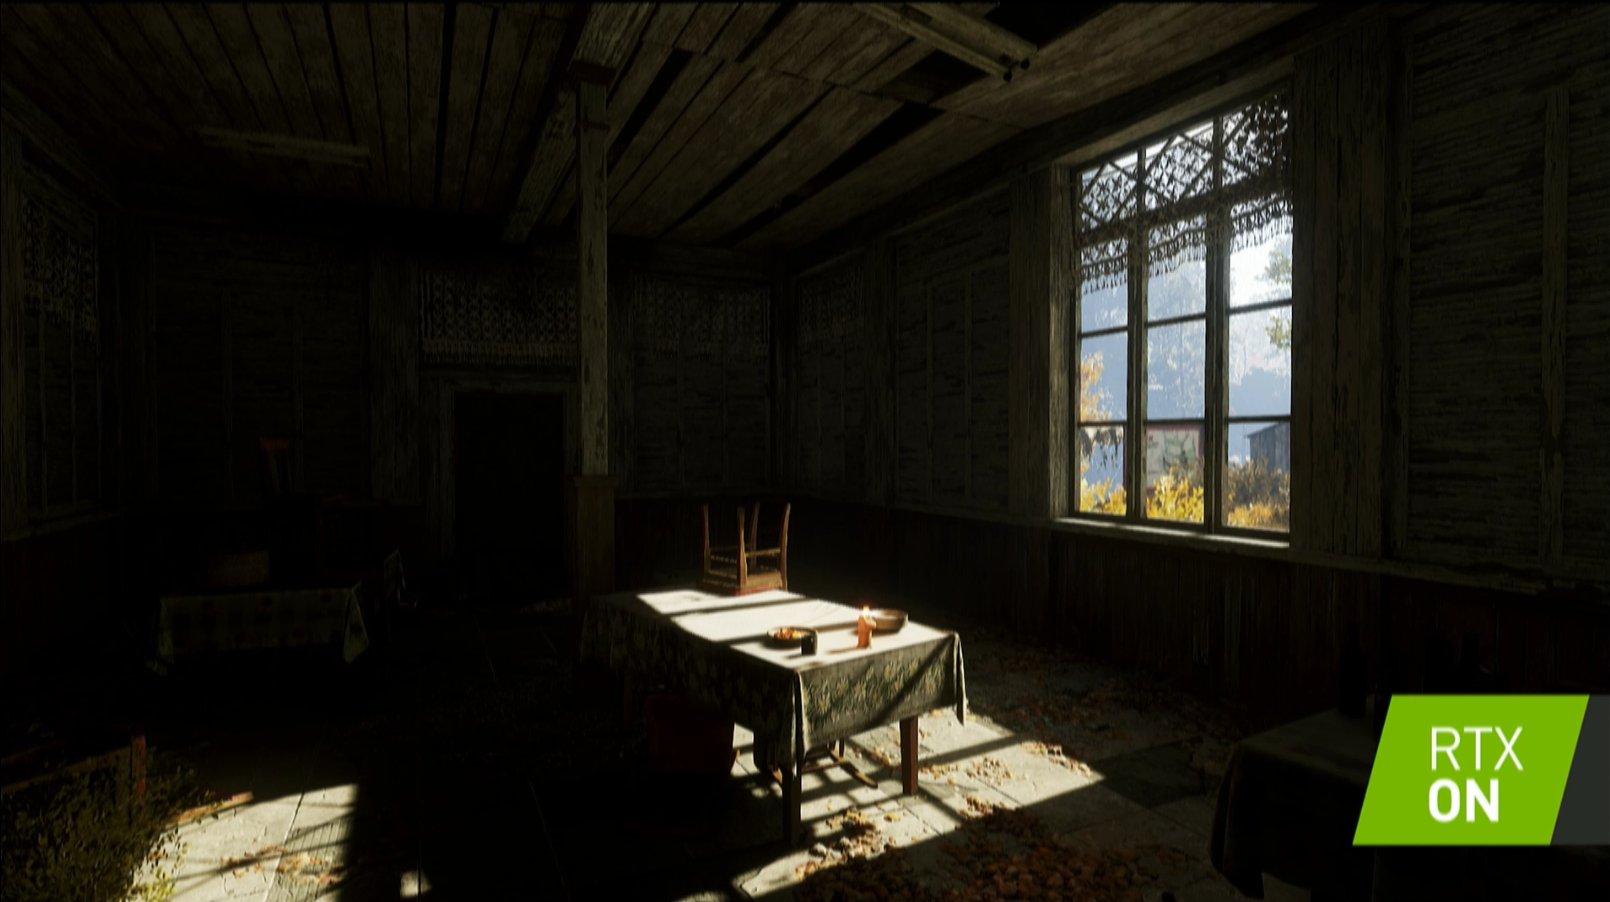 TechRadar on Twitter: "Now, Nvidia has used the Metro Exodus game to showcase the RTX GPU's global illumination capabilities more intelligent lighting. The result is more photorealistic lighting in dark